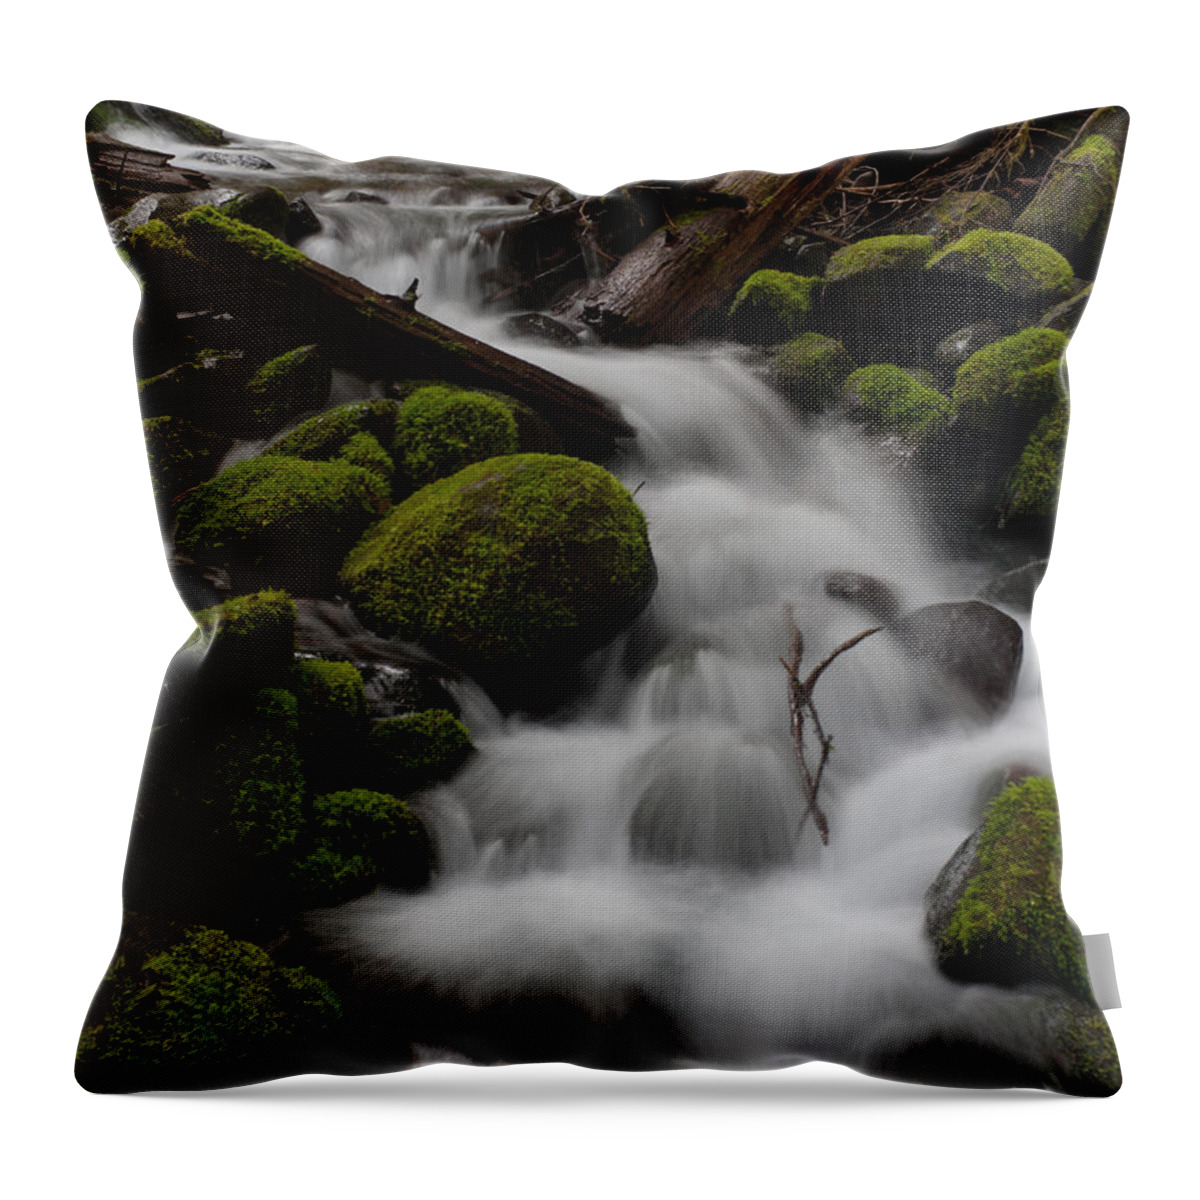 Olympic National Park Throw Pillow featuring the photograph Stepping Stones by Mike Reid